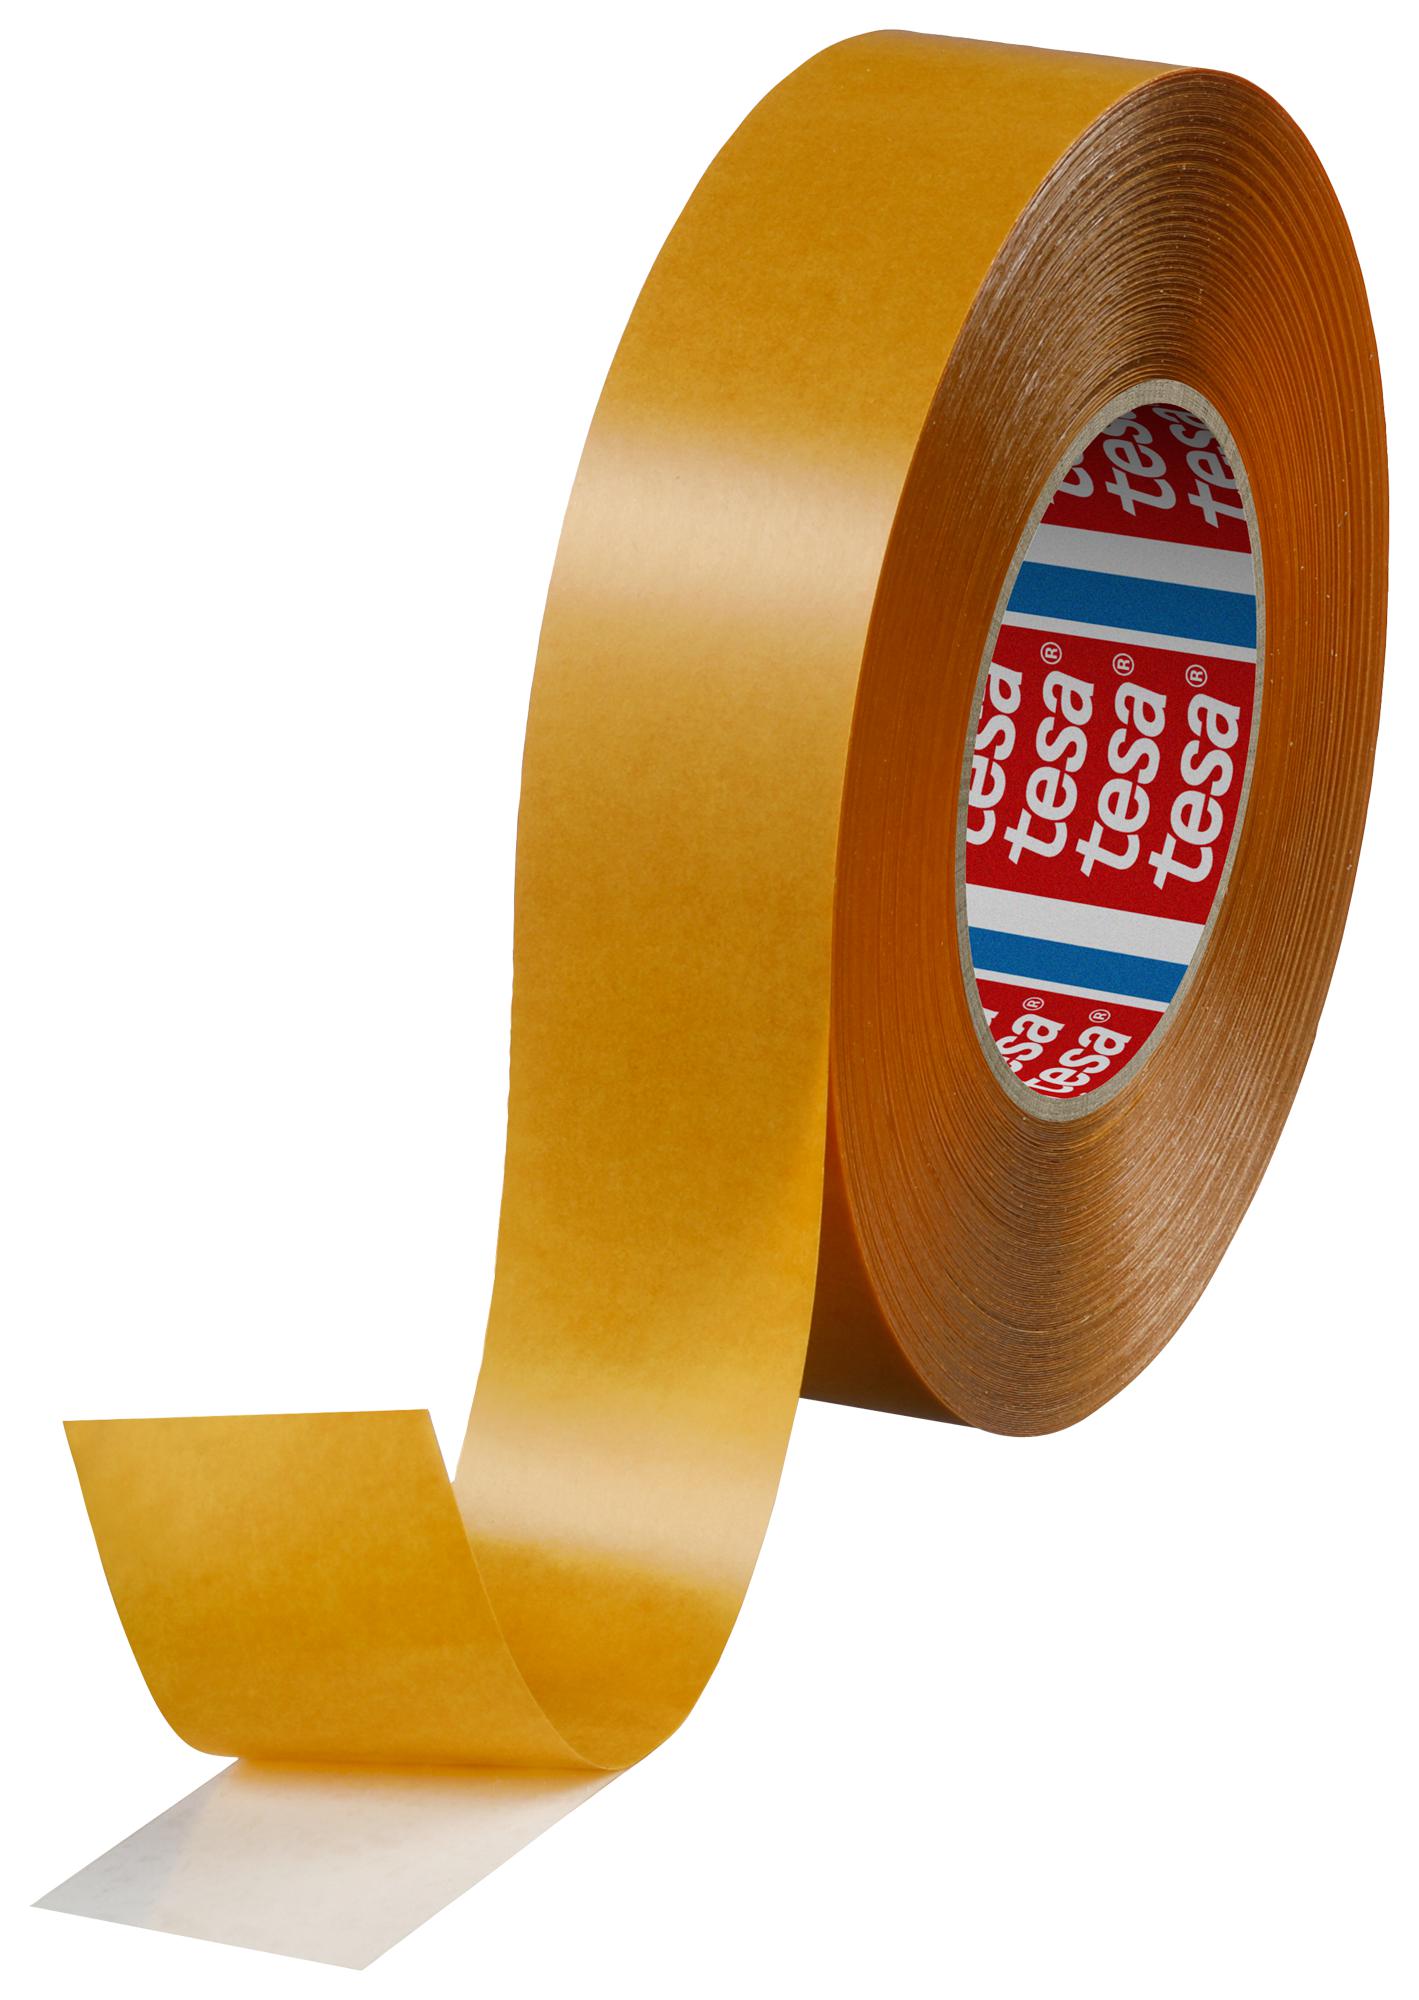 Tesa 51970-00027-00 Double Sided Tape, Pp, 50M X 38mm